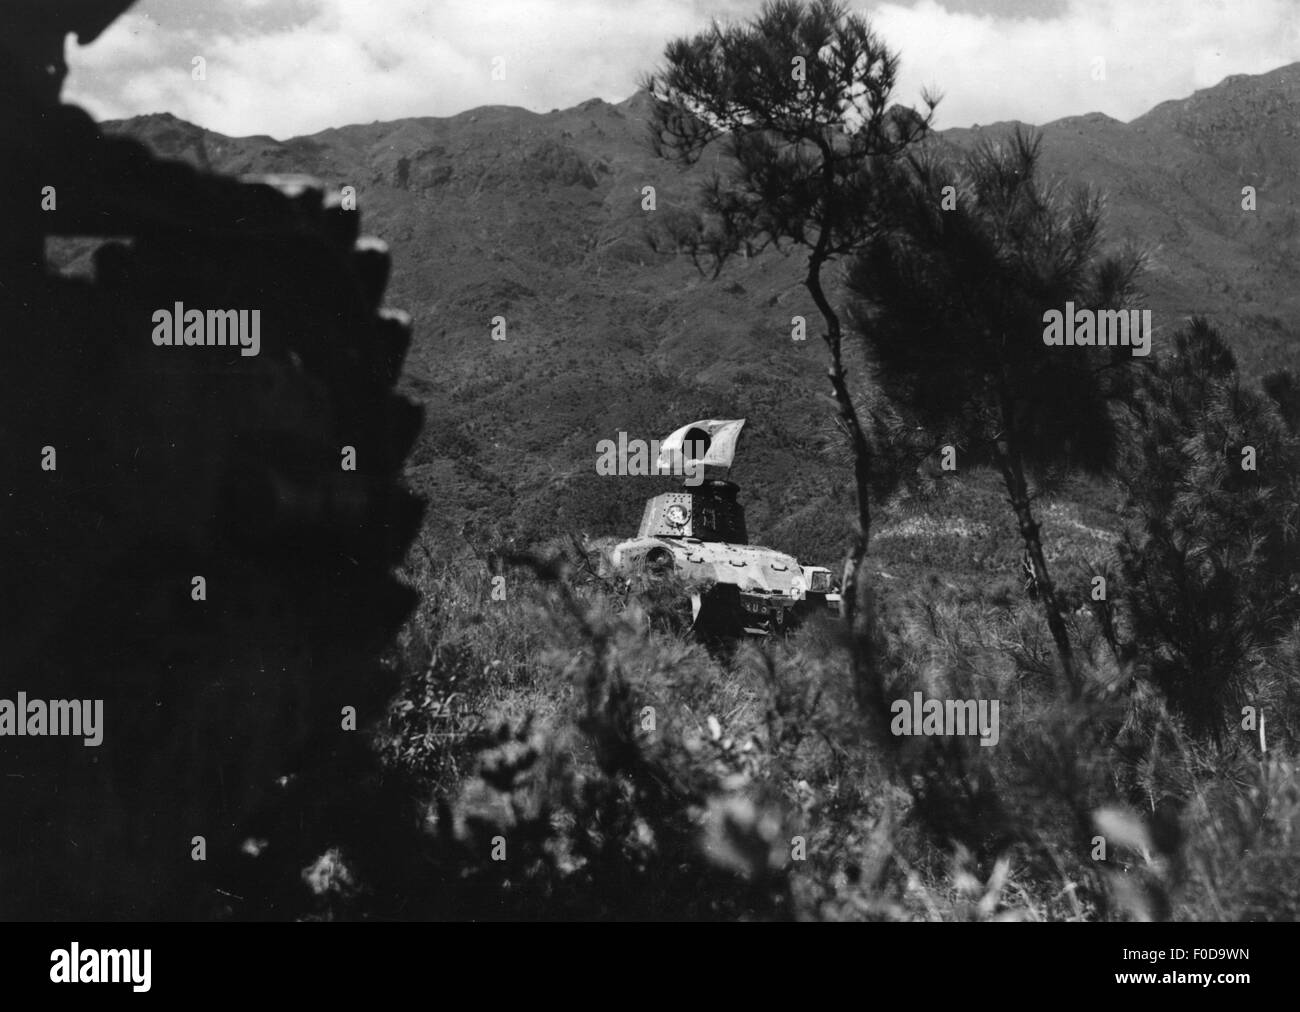 events, Second Sino-Japanese War 1937 - 1945, Japanese tank near Juikang, Jiangxi province, 1.10.1938, China, Asia, 20th century, historic, historical, Sino Japanese, flag, JP, 1930s, Additional-Rights-Clearences-Not Available Stock Photo